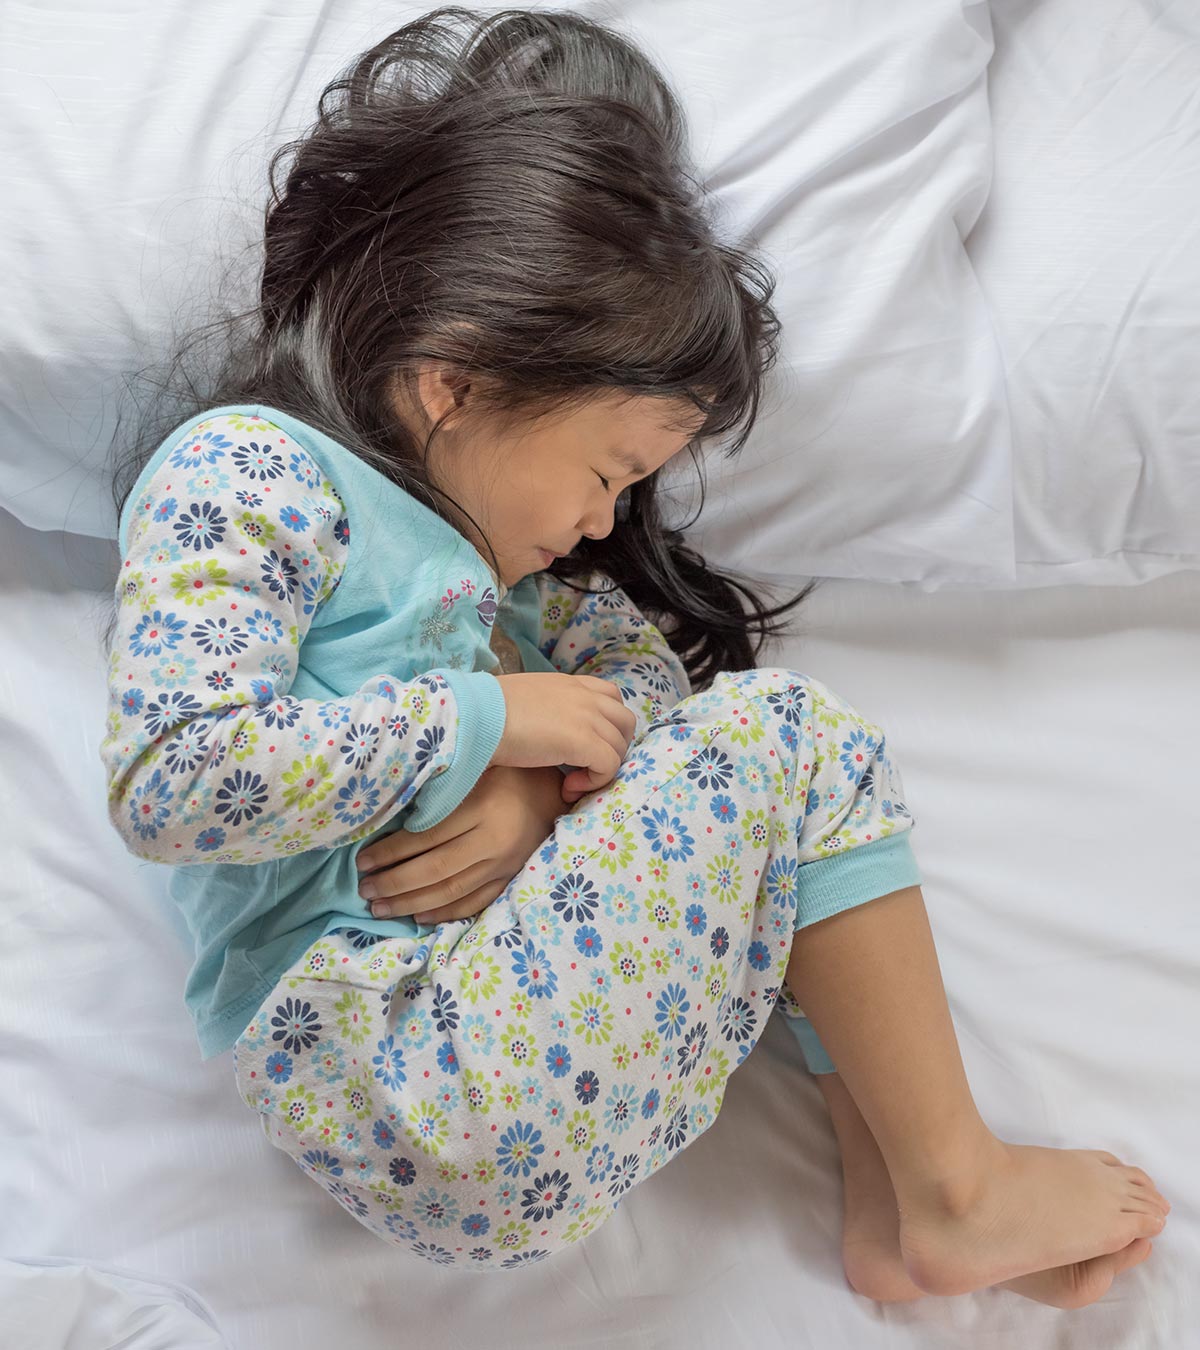 Worm Infections In Children: Symptoms, Treatment & Remedies